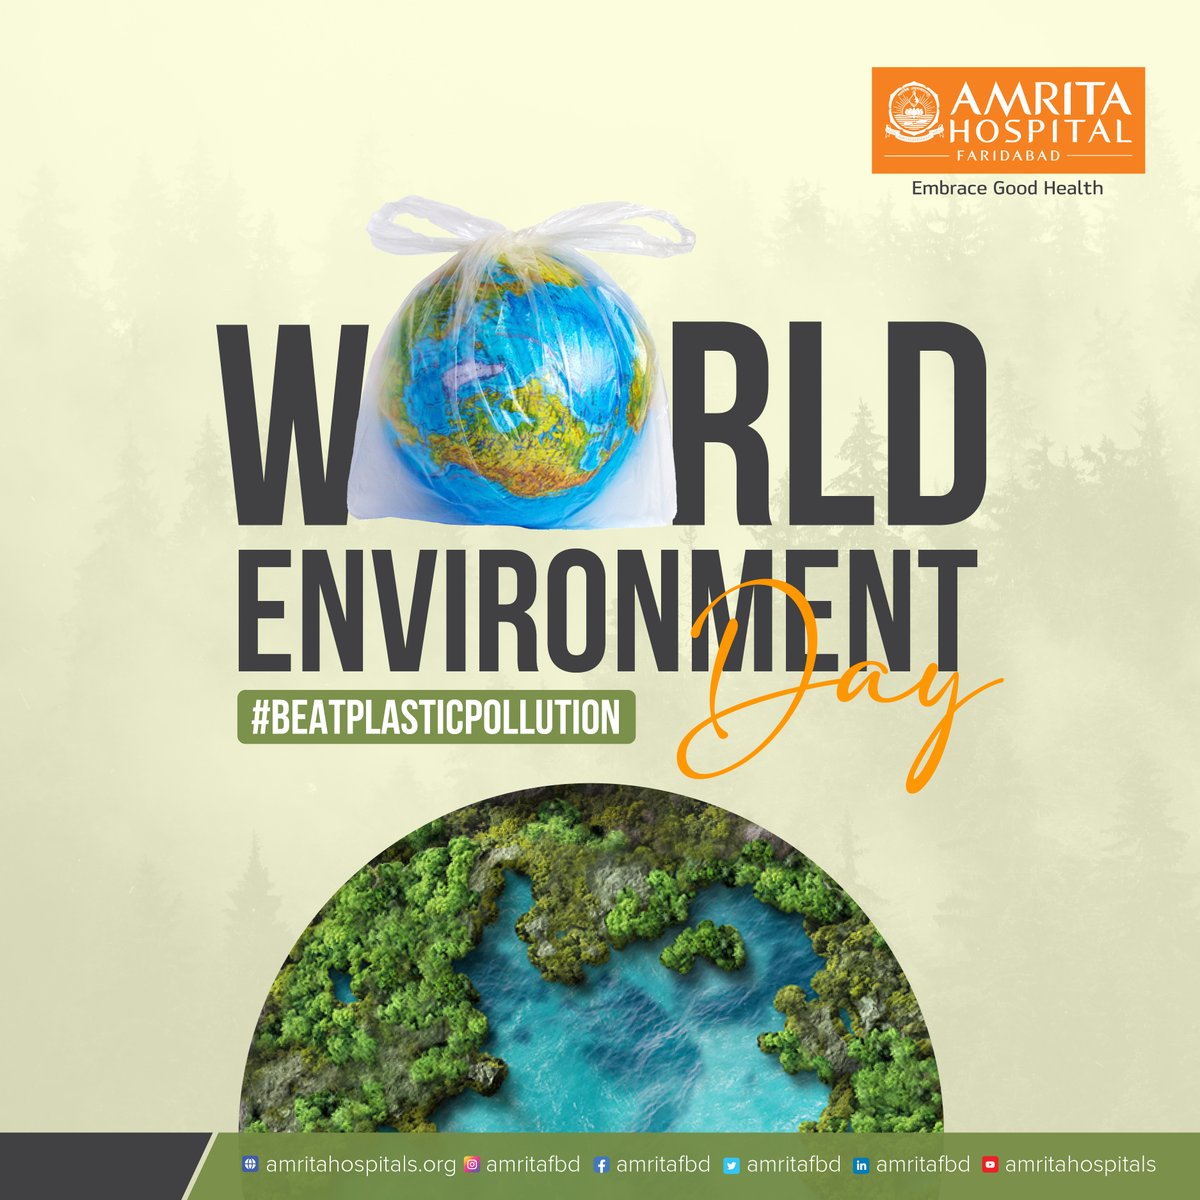 Accept recycling and reusing as a lifestyle to reduce plastic waste. Our actions against plastic pollution shape the future. 
On this #WorldEnvironmentDay2023, let’s unite to #BeatPlasticPollution 
#EmbraceGoodHealth #AmritaHospitalFaridabad